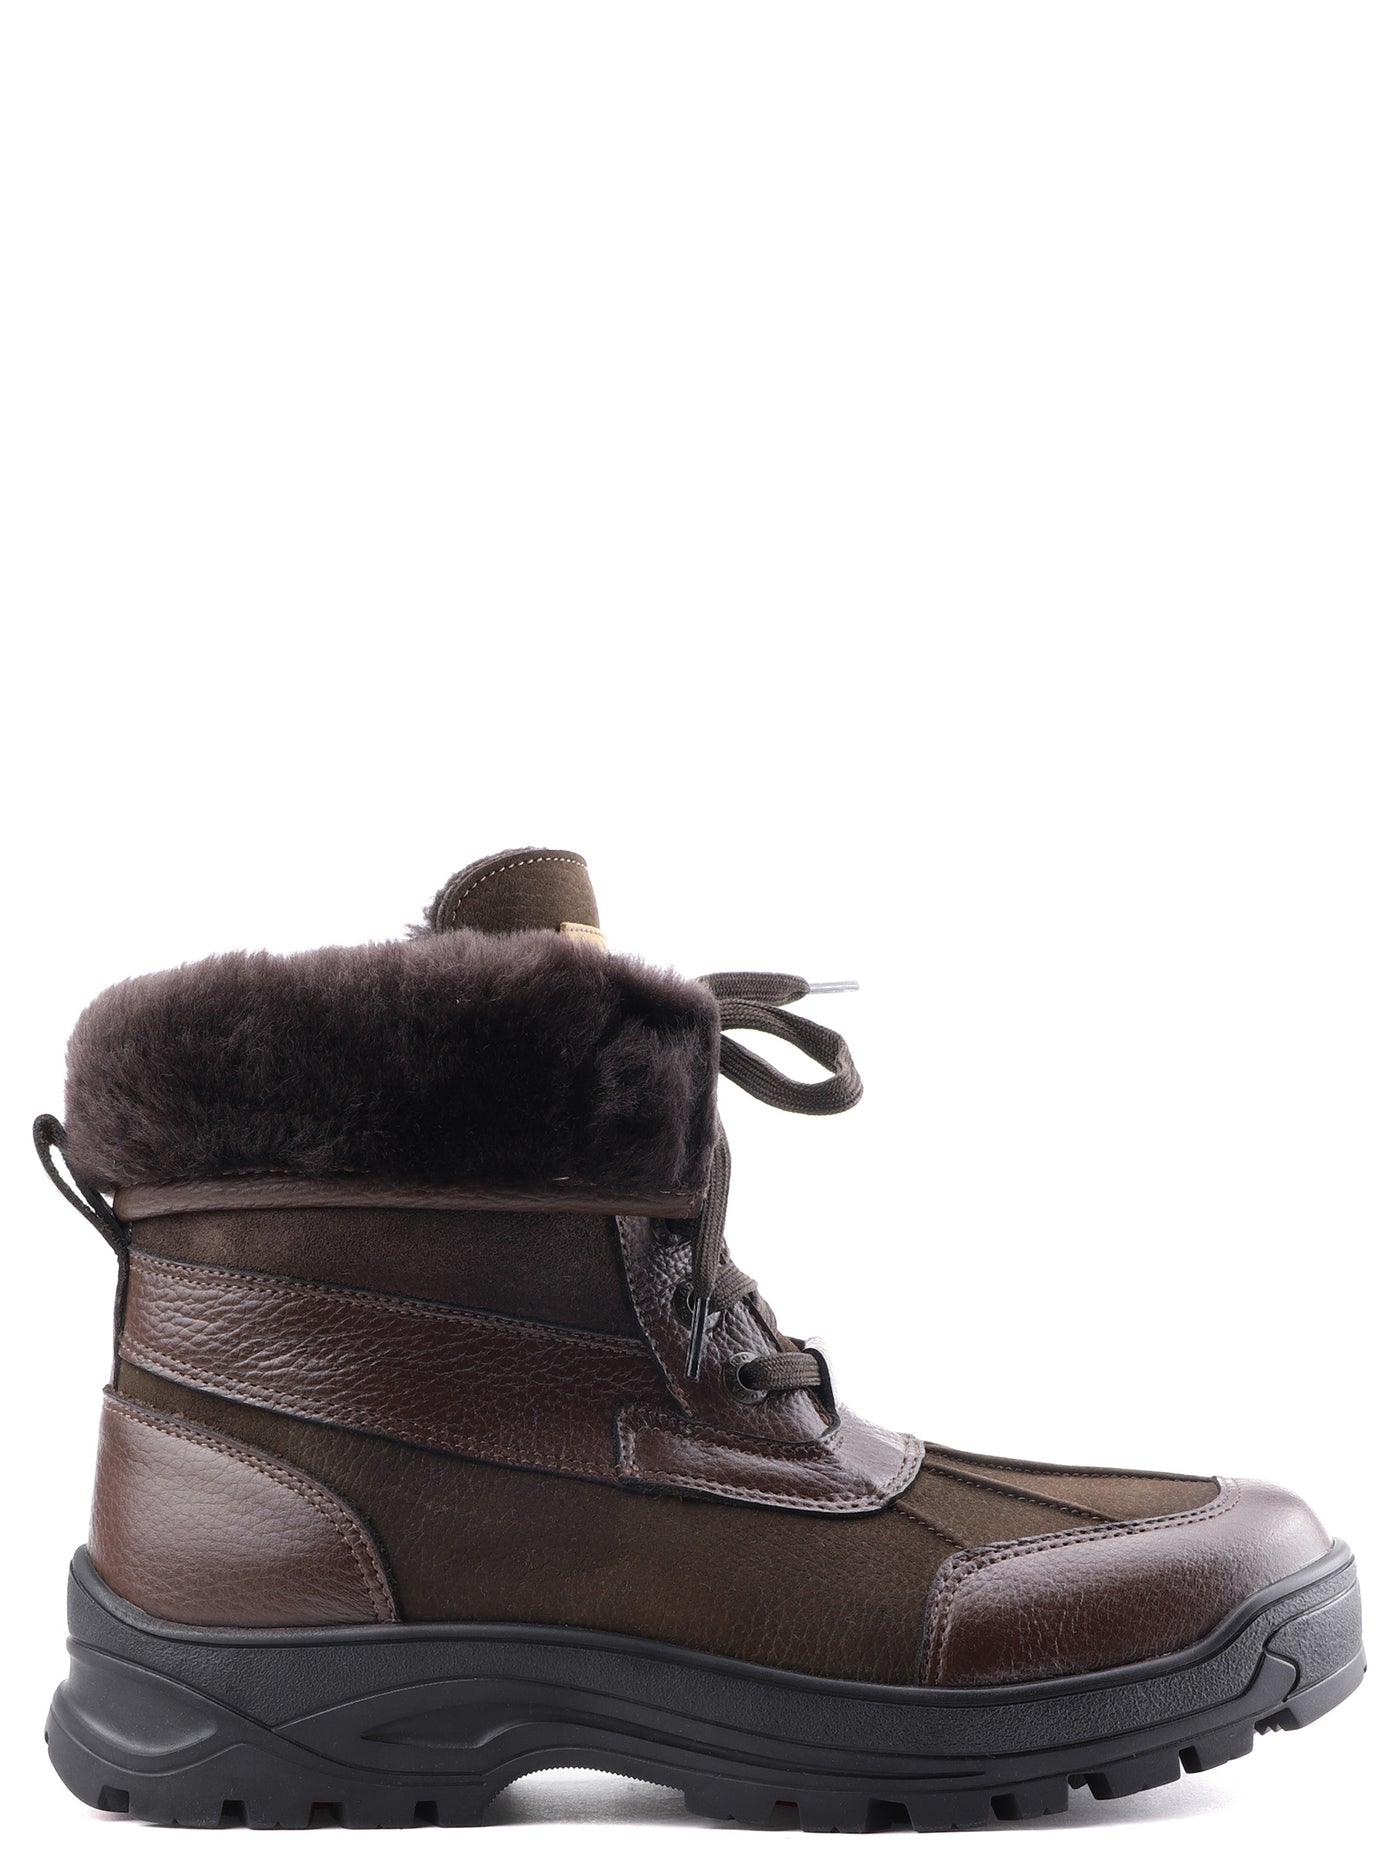 Mike Men's Heritage Boot w/ Ice Grippers